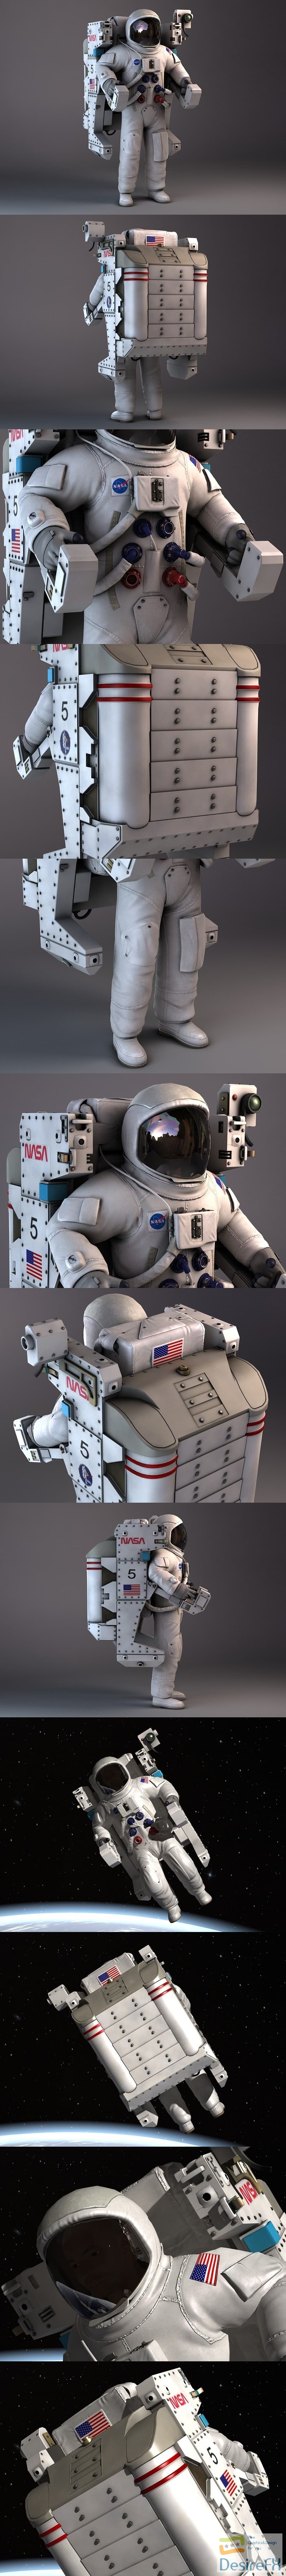 NASA MMU Backpack With Astronaut 3D Model